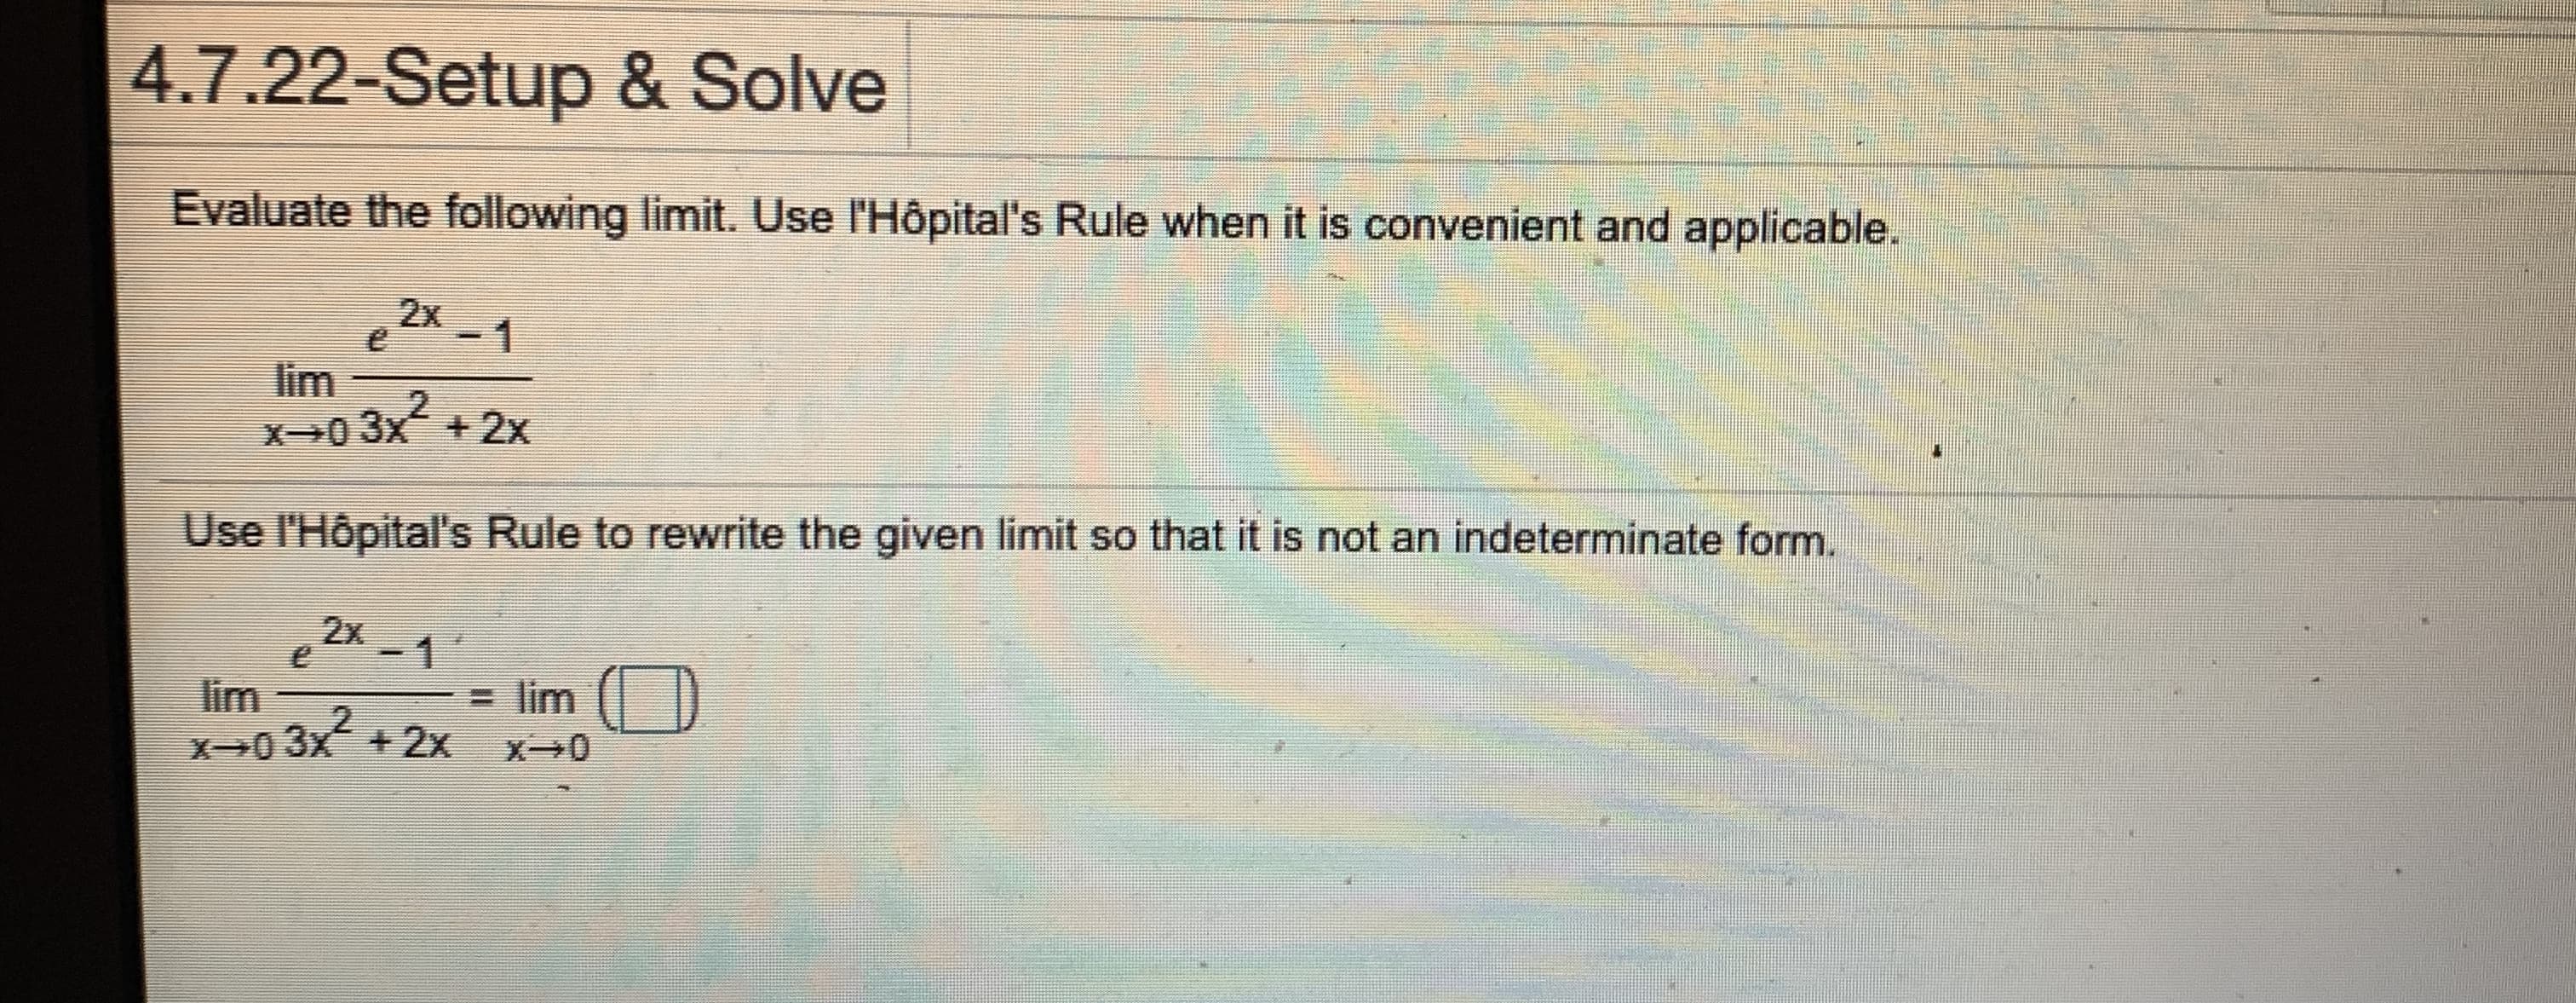 Evaluate the following limit. Use l'Hôpital's Rule when it is convenient and applicable.
2x
1
lim
X0 3x +2x
